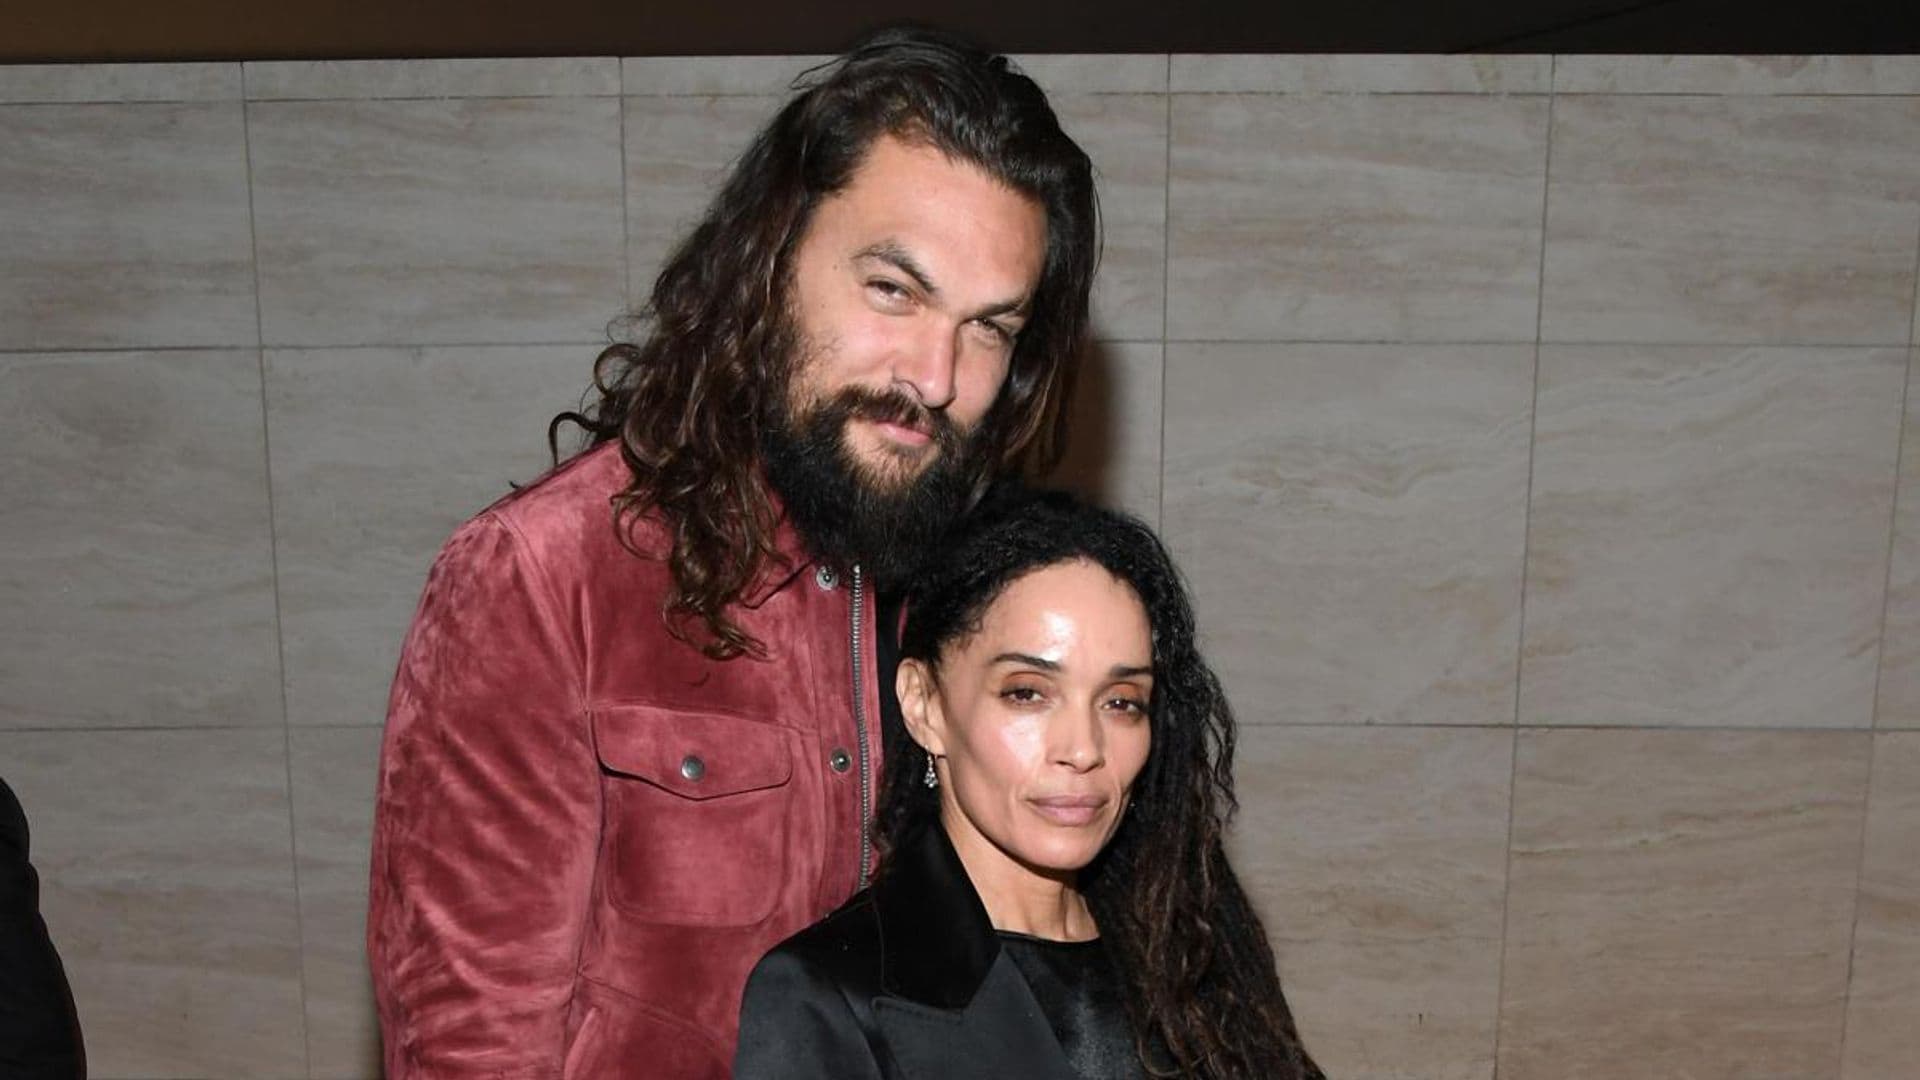 Jason Momoa and Lisa Bonet might be giving their relationship a second chance